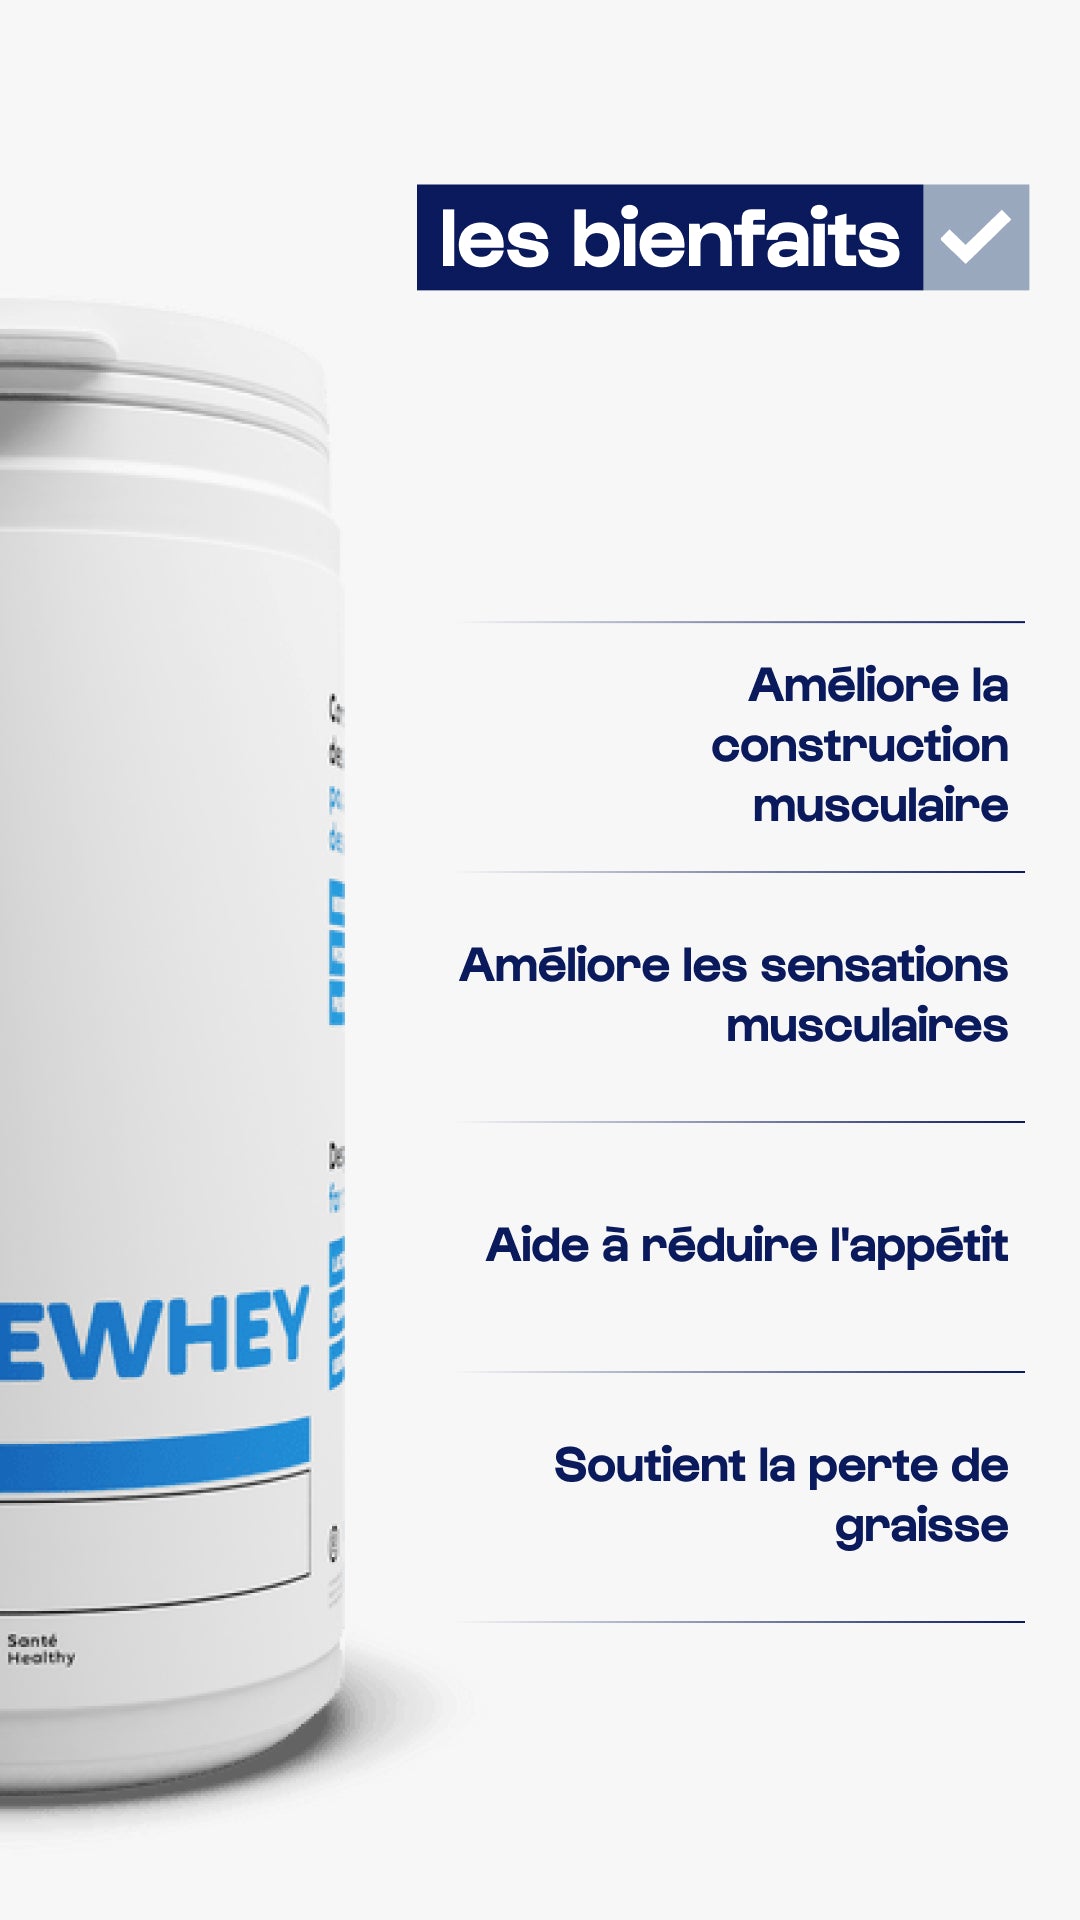 Musclewhey - Mix Protein